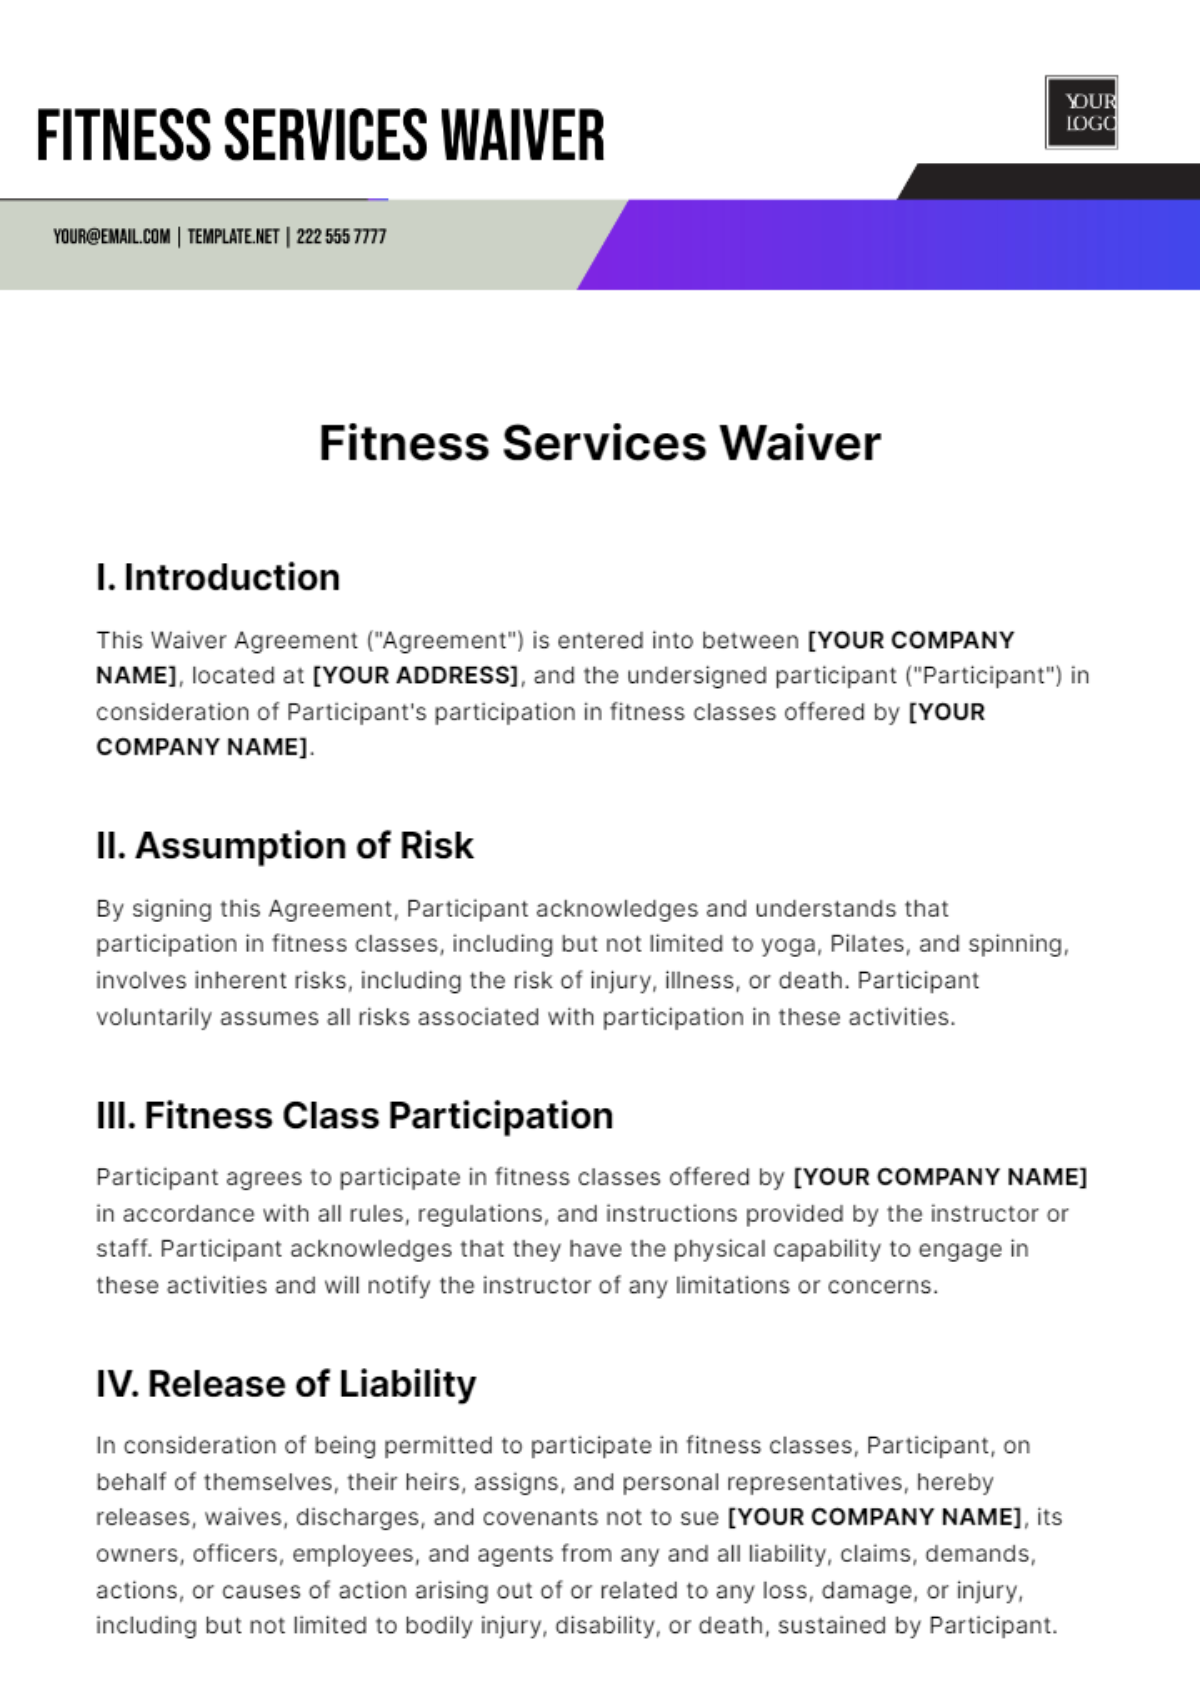 Fitness Services Waiver Template